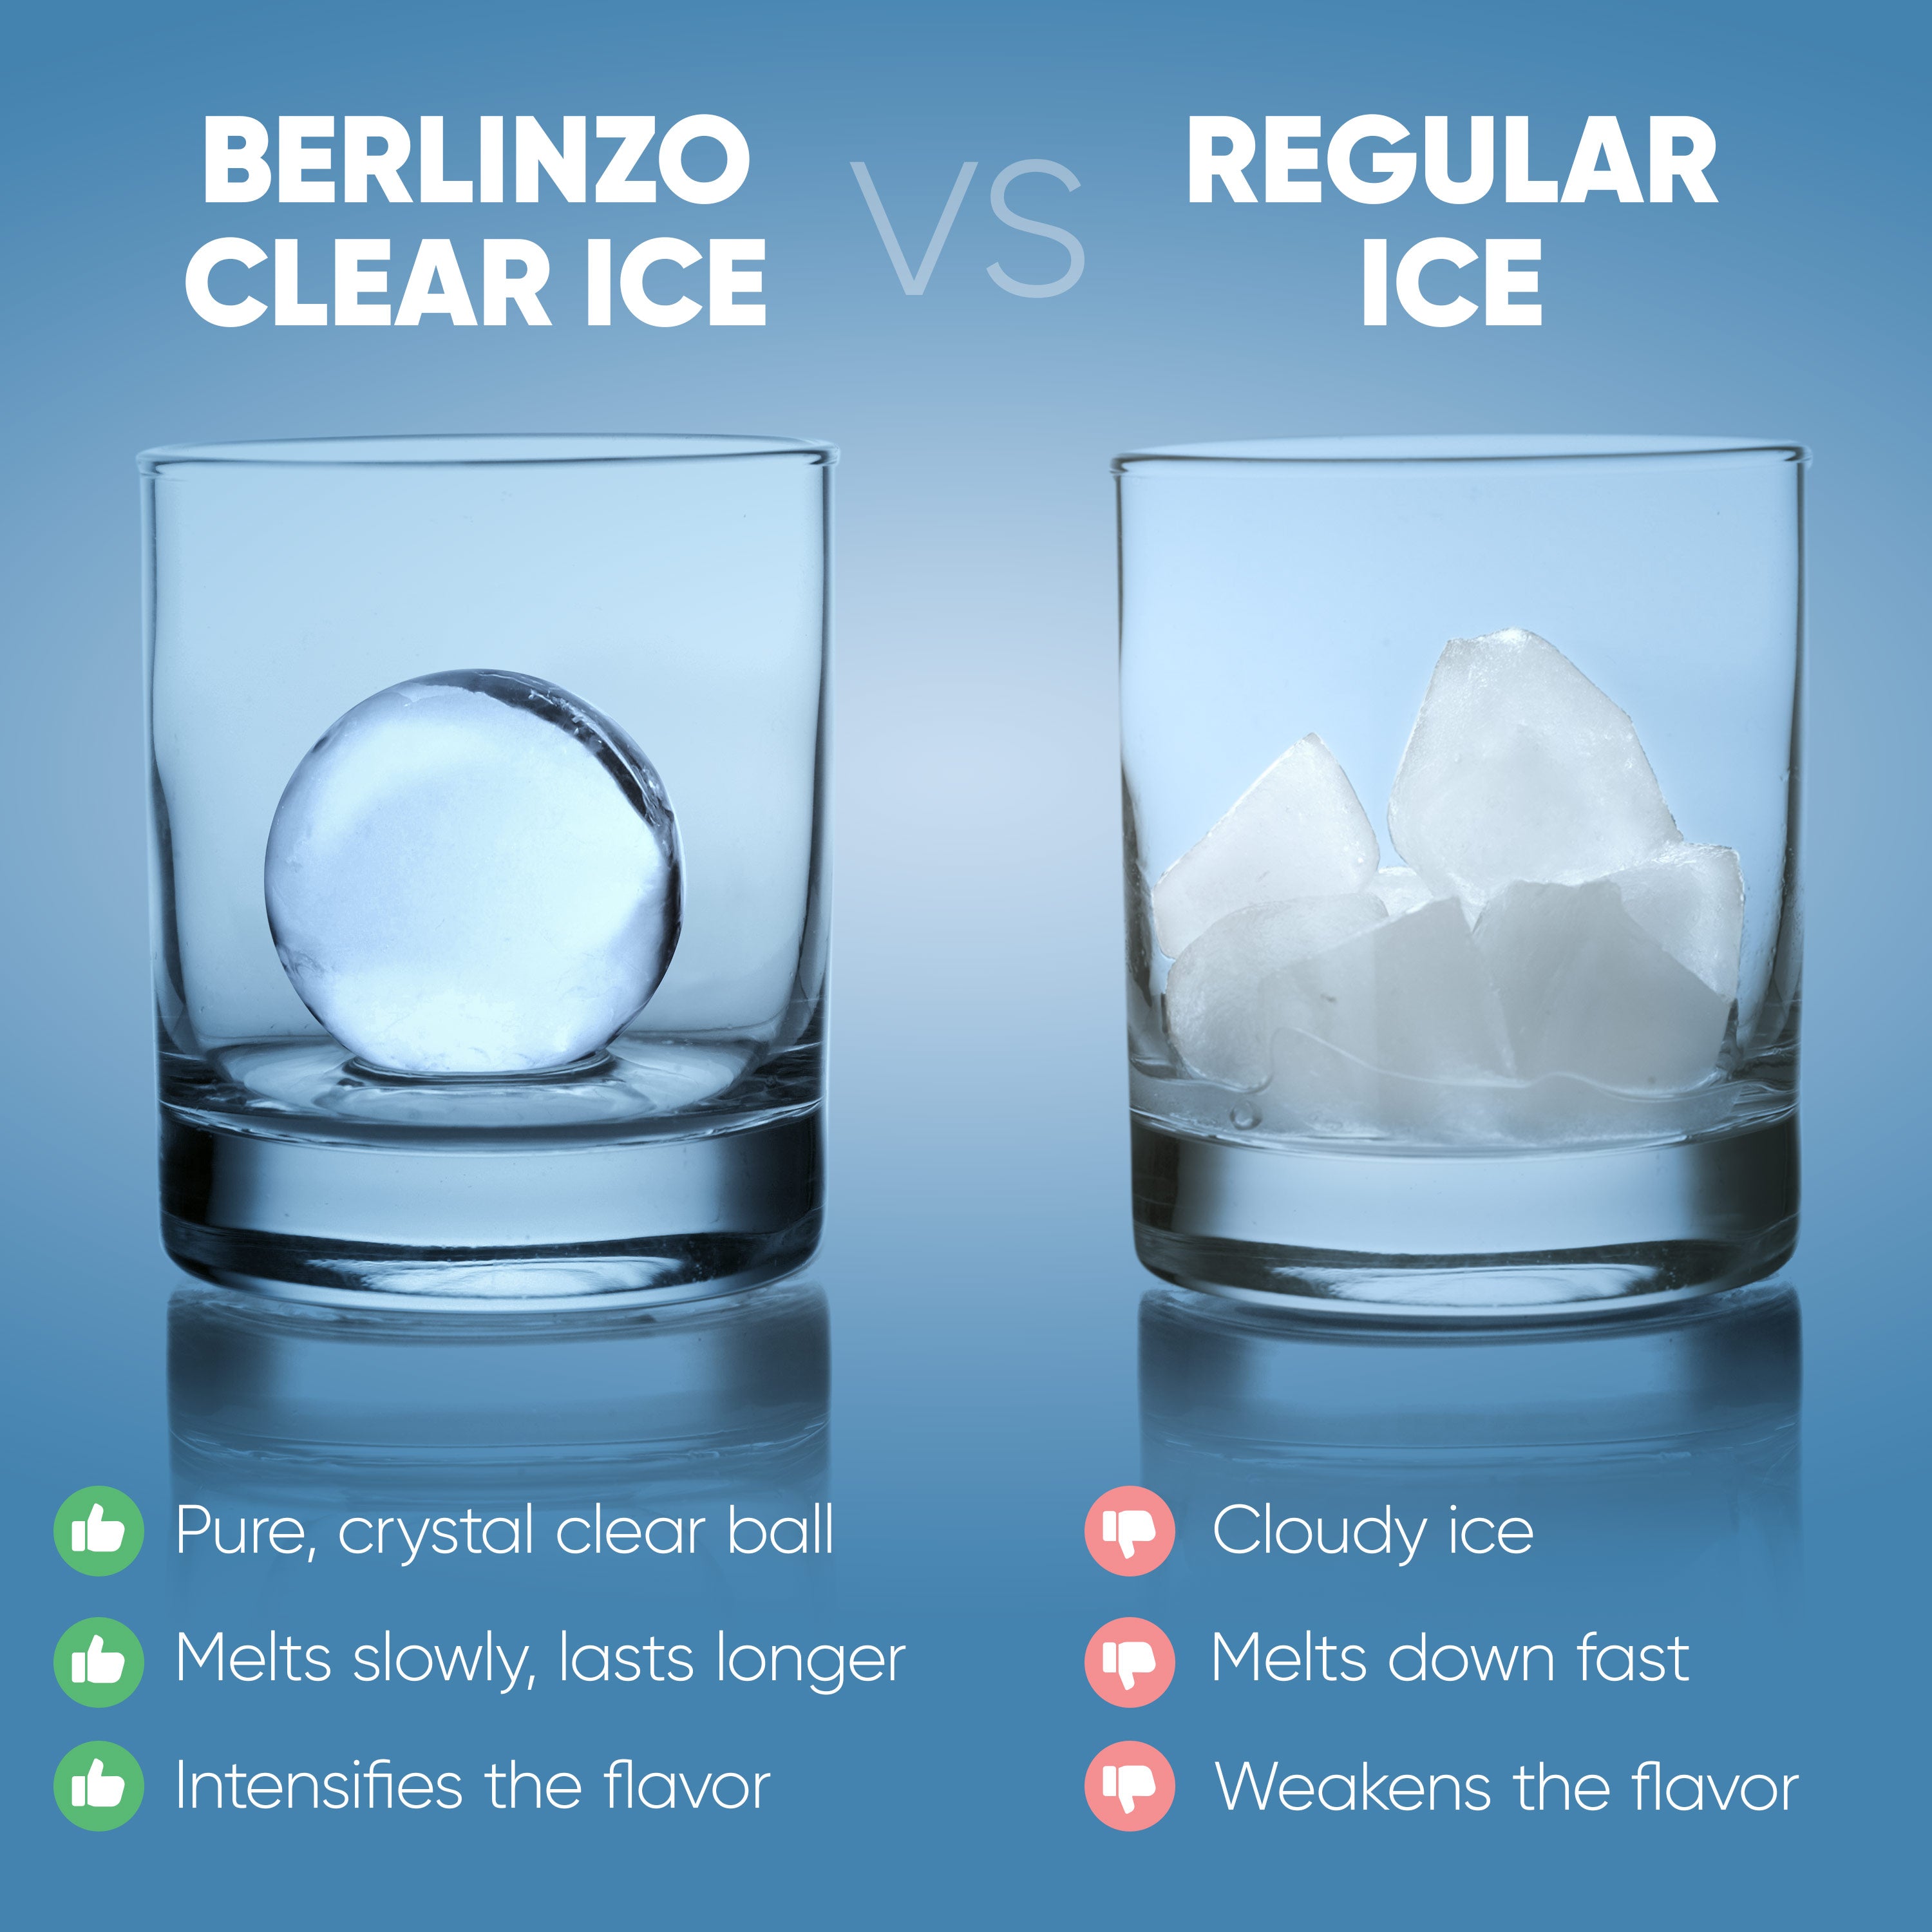 Does Clear Ice Really Matter?